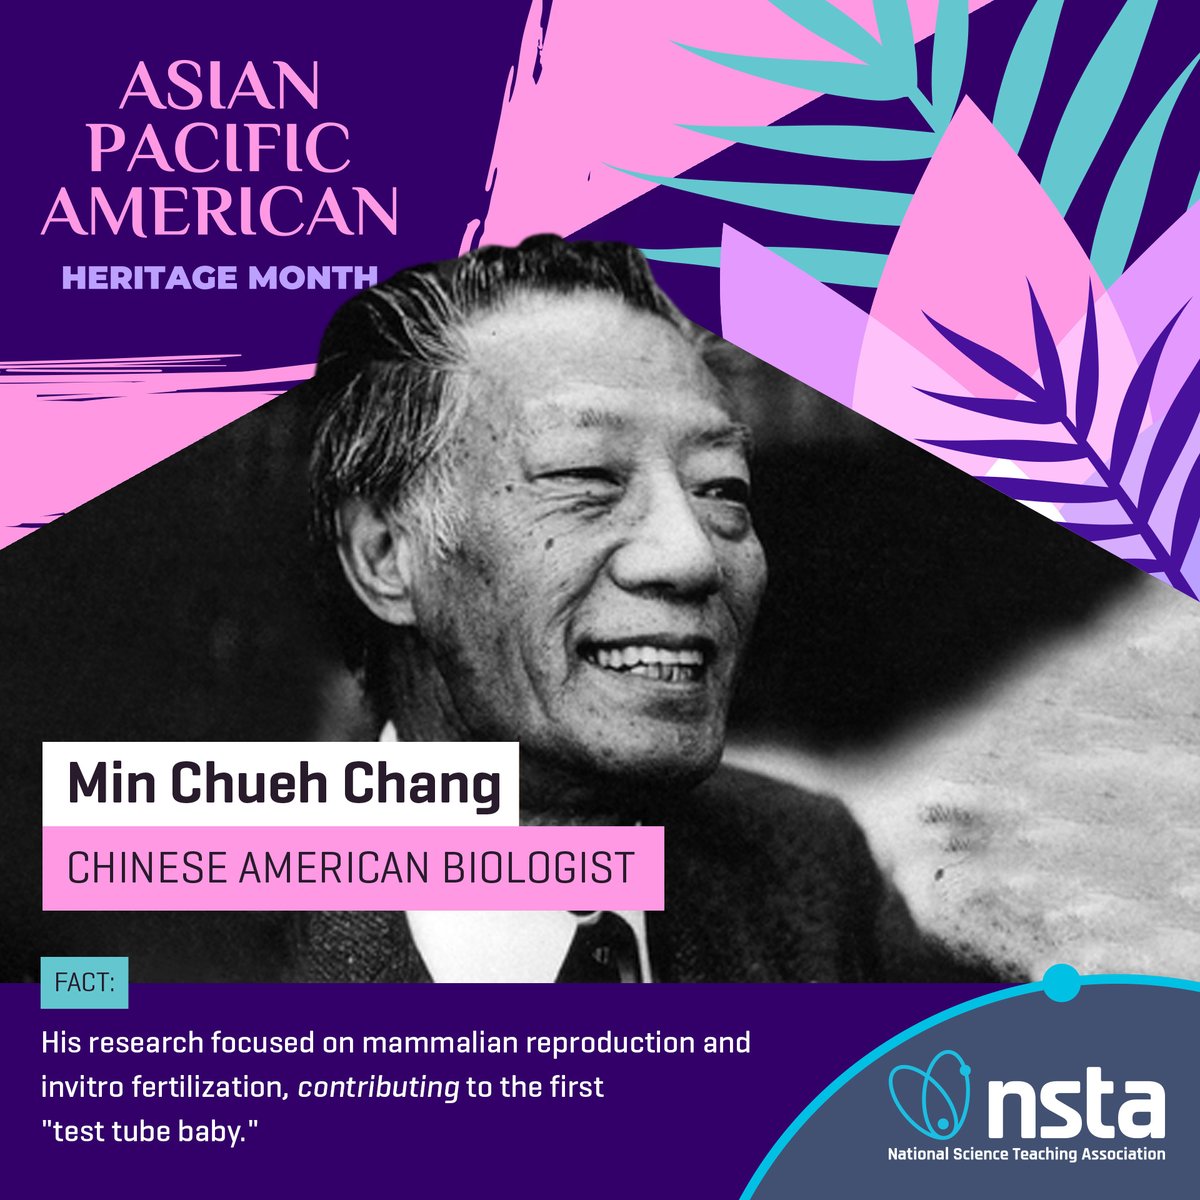 This #AsianPacificAmericanHeritageMonth NSTA highlights Min Chueh Chang, Chinese American biologist. His research focused on mammalian reproduction, contributing to the first 'test-tube baby' and the development of the oral contraceptive pill! Learn more: bit.ly/3Vcw9Hi